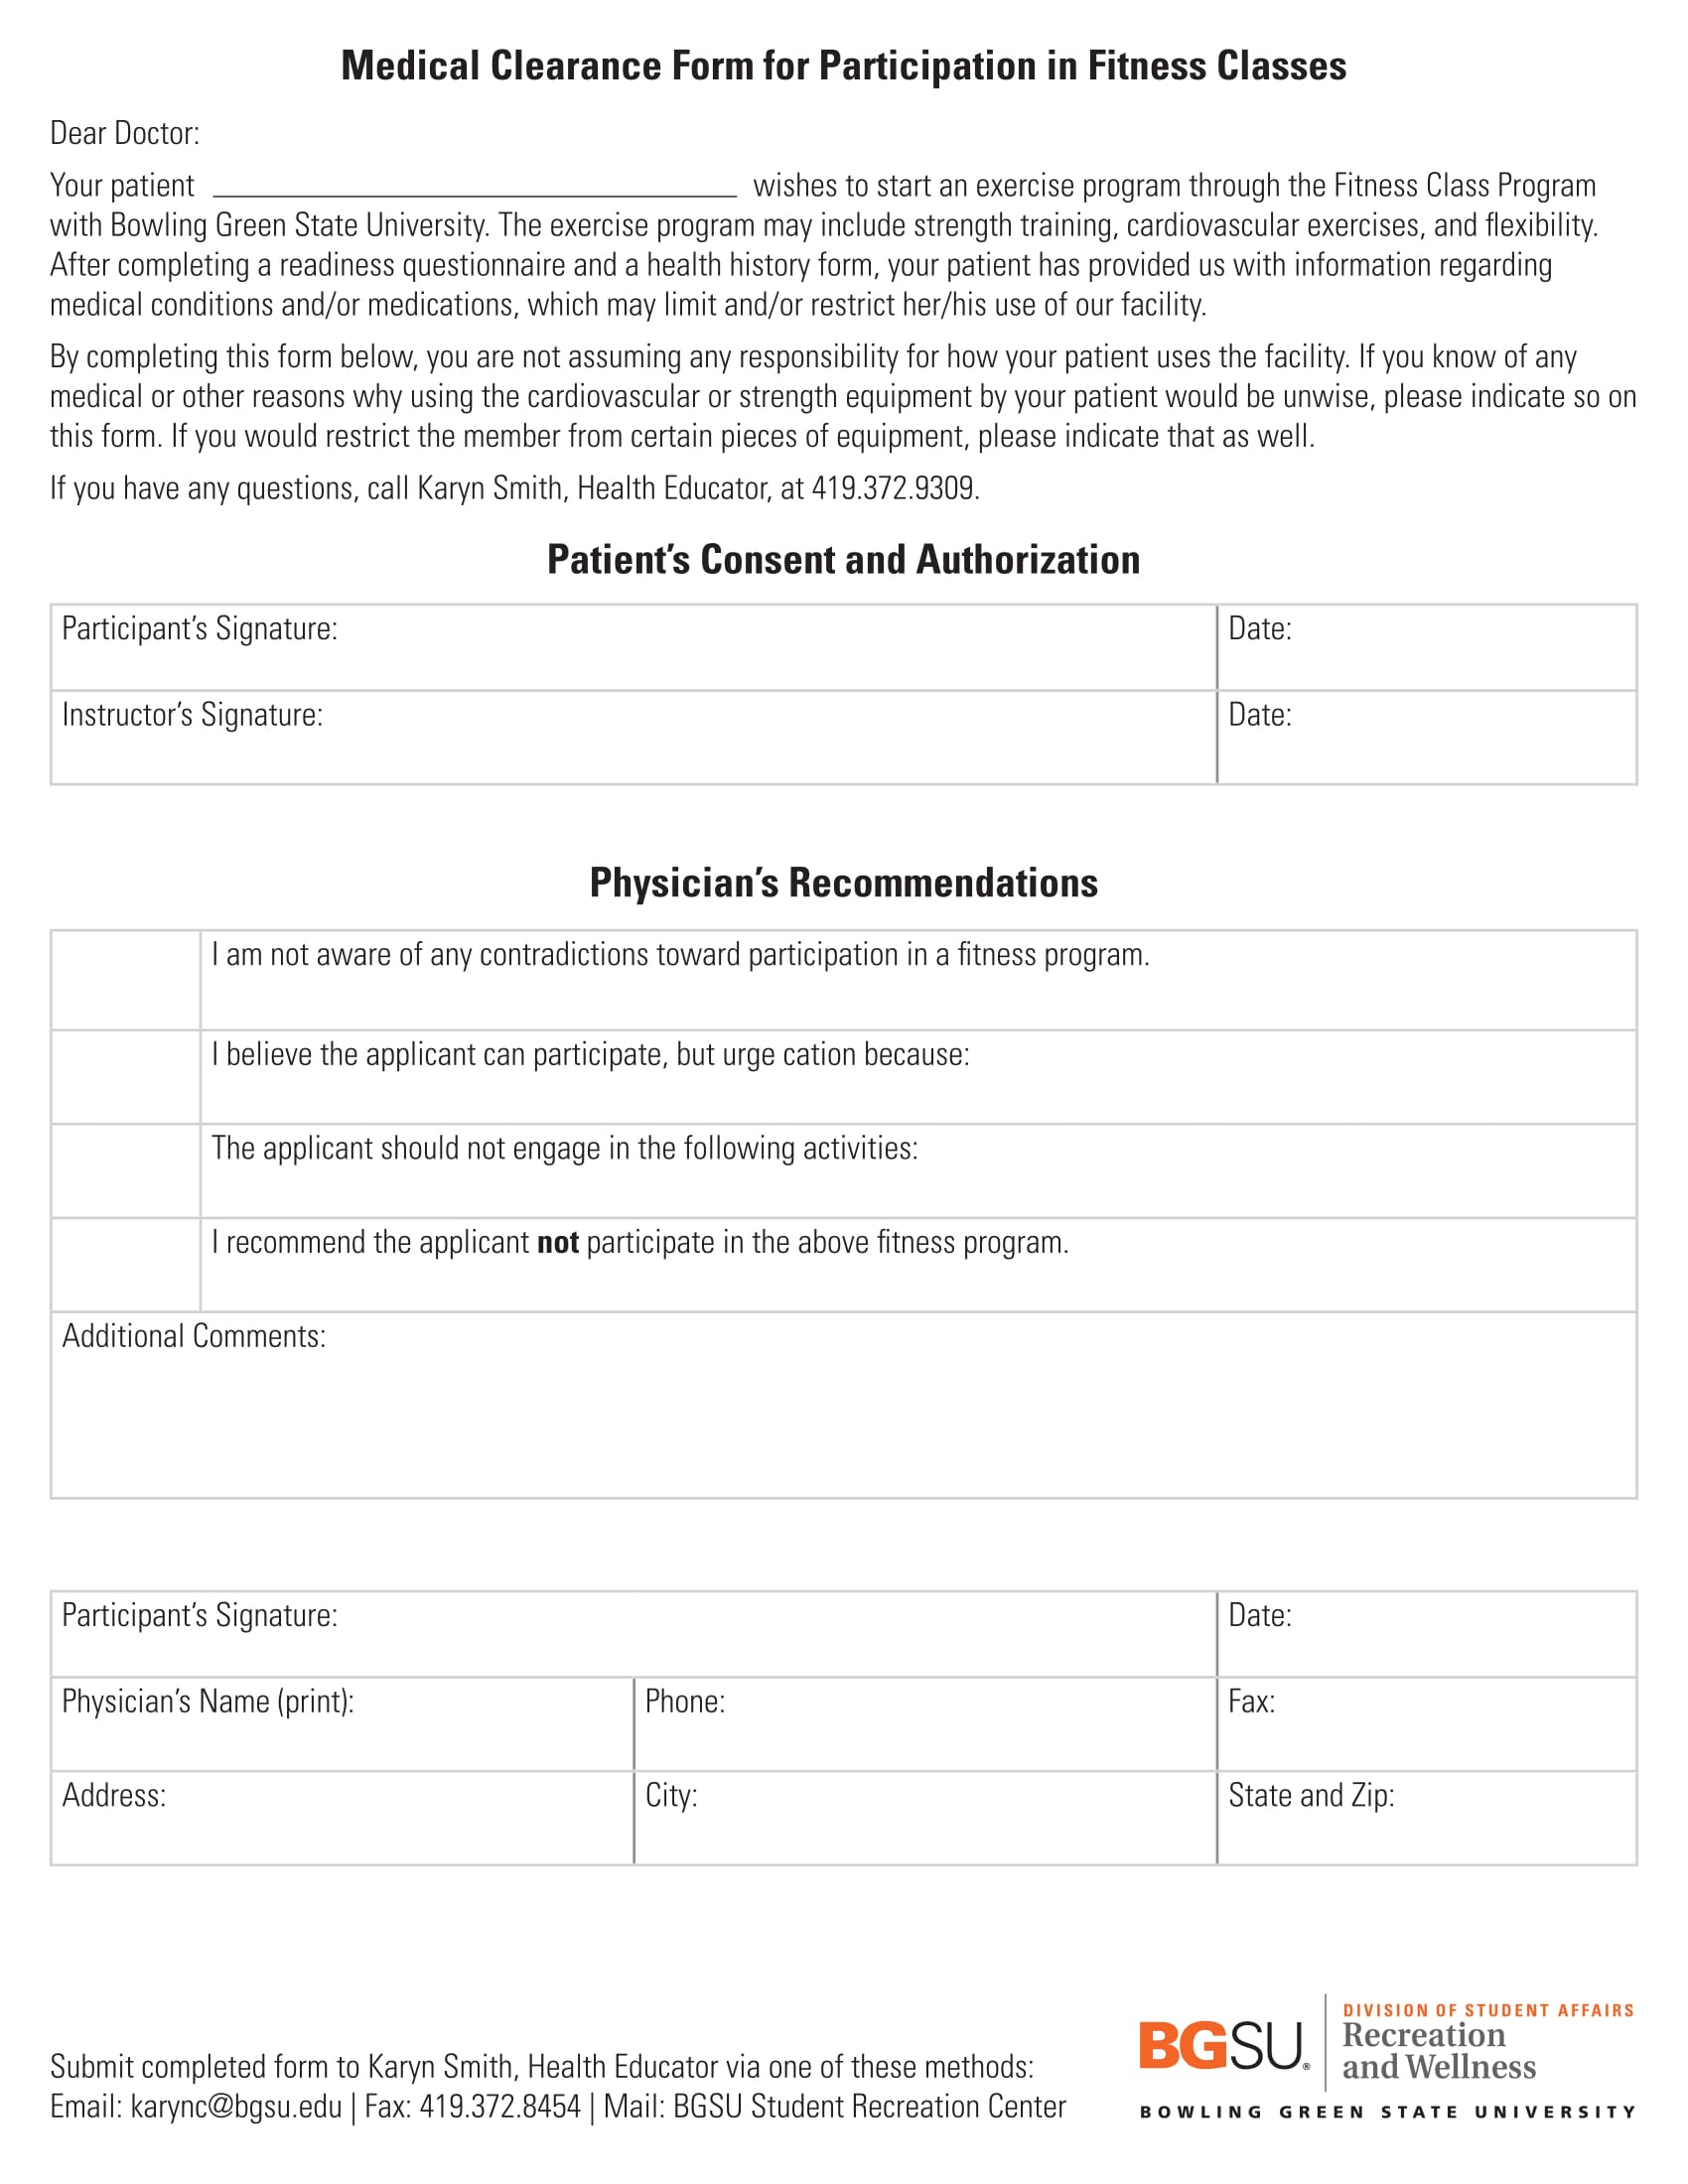 fitness class medical clearance form 1